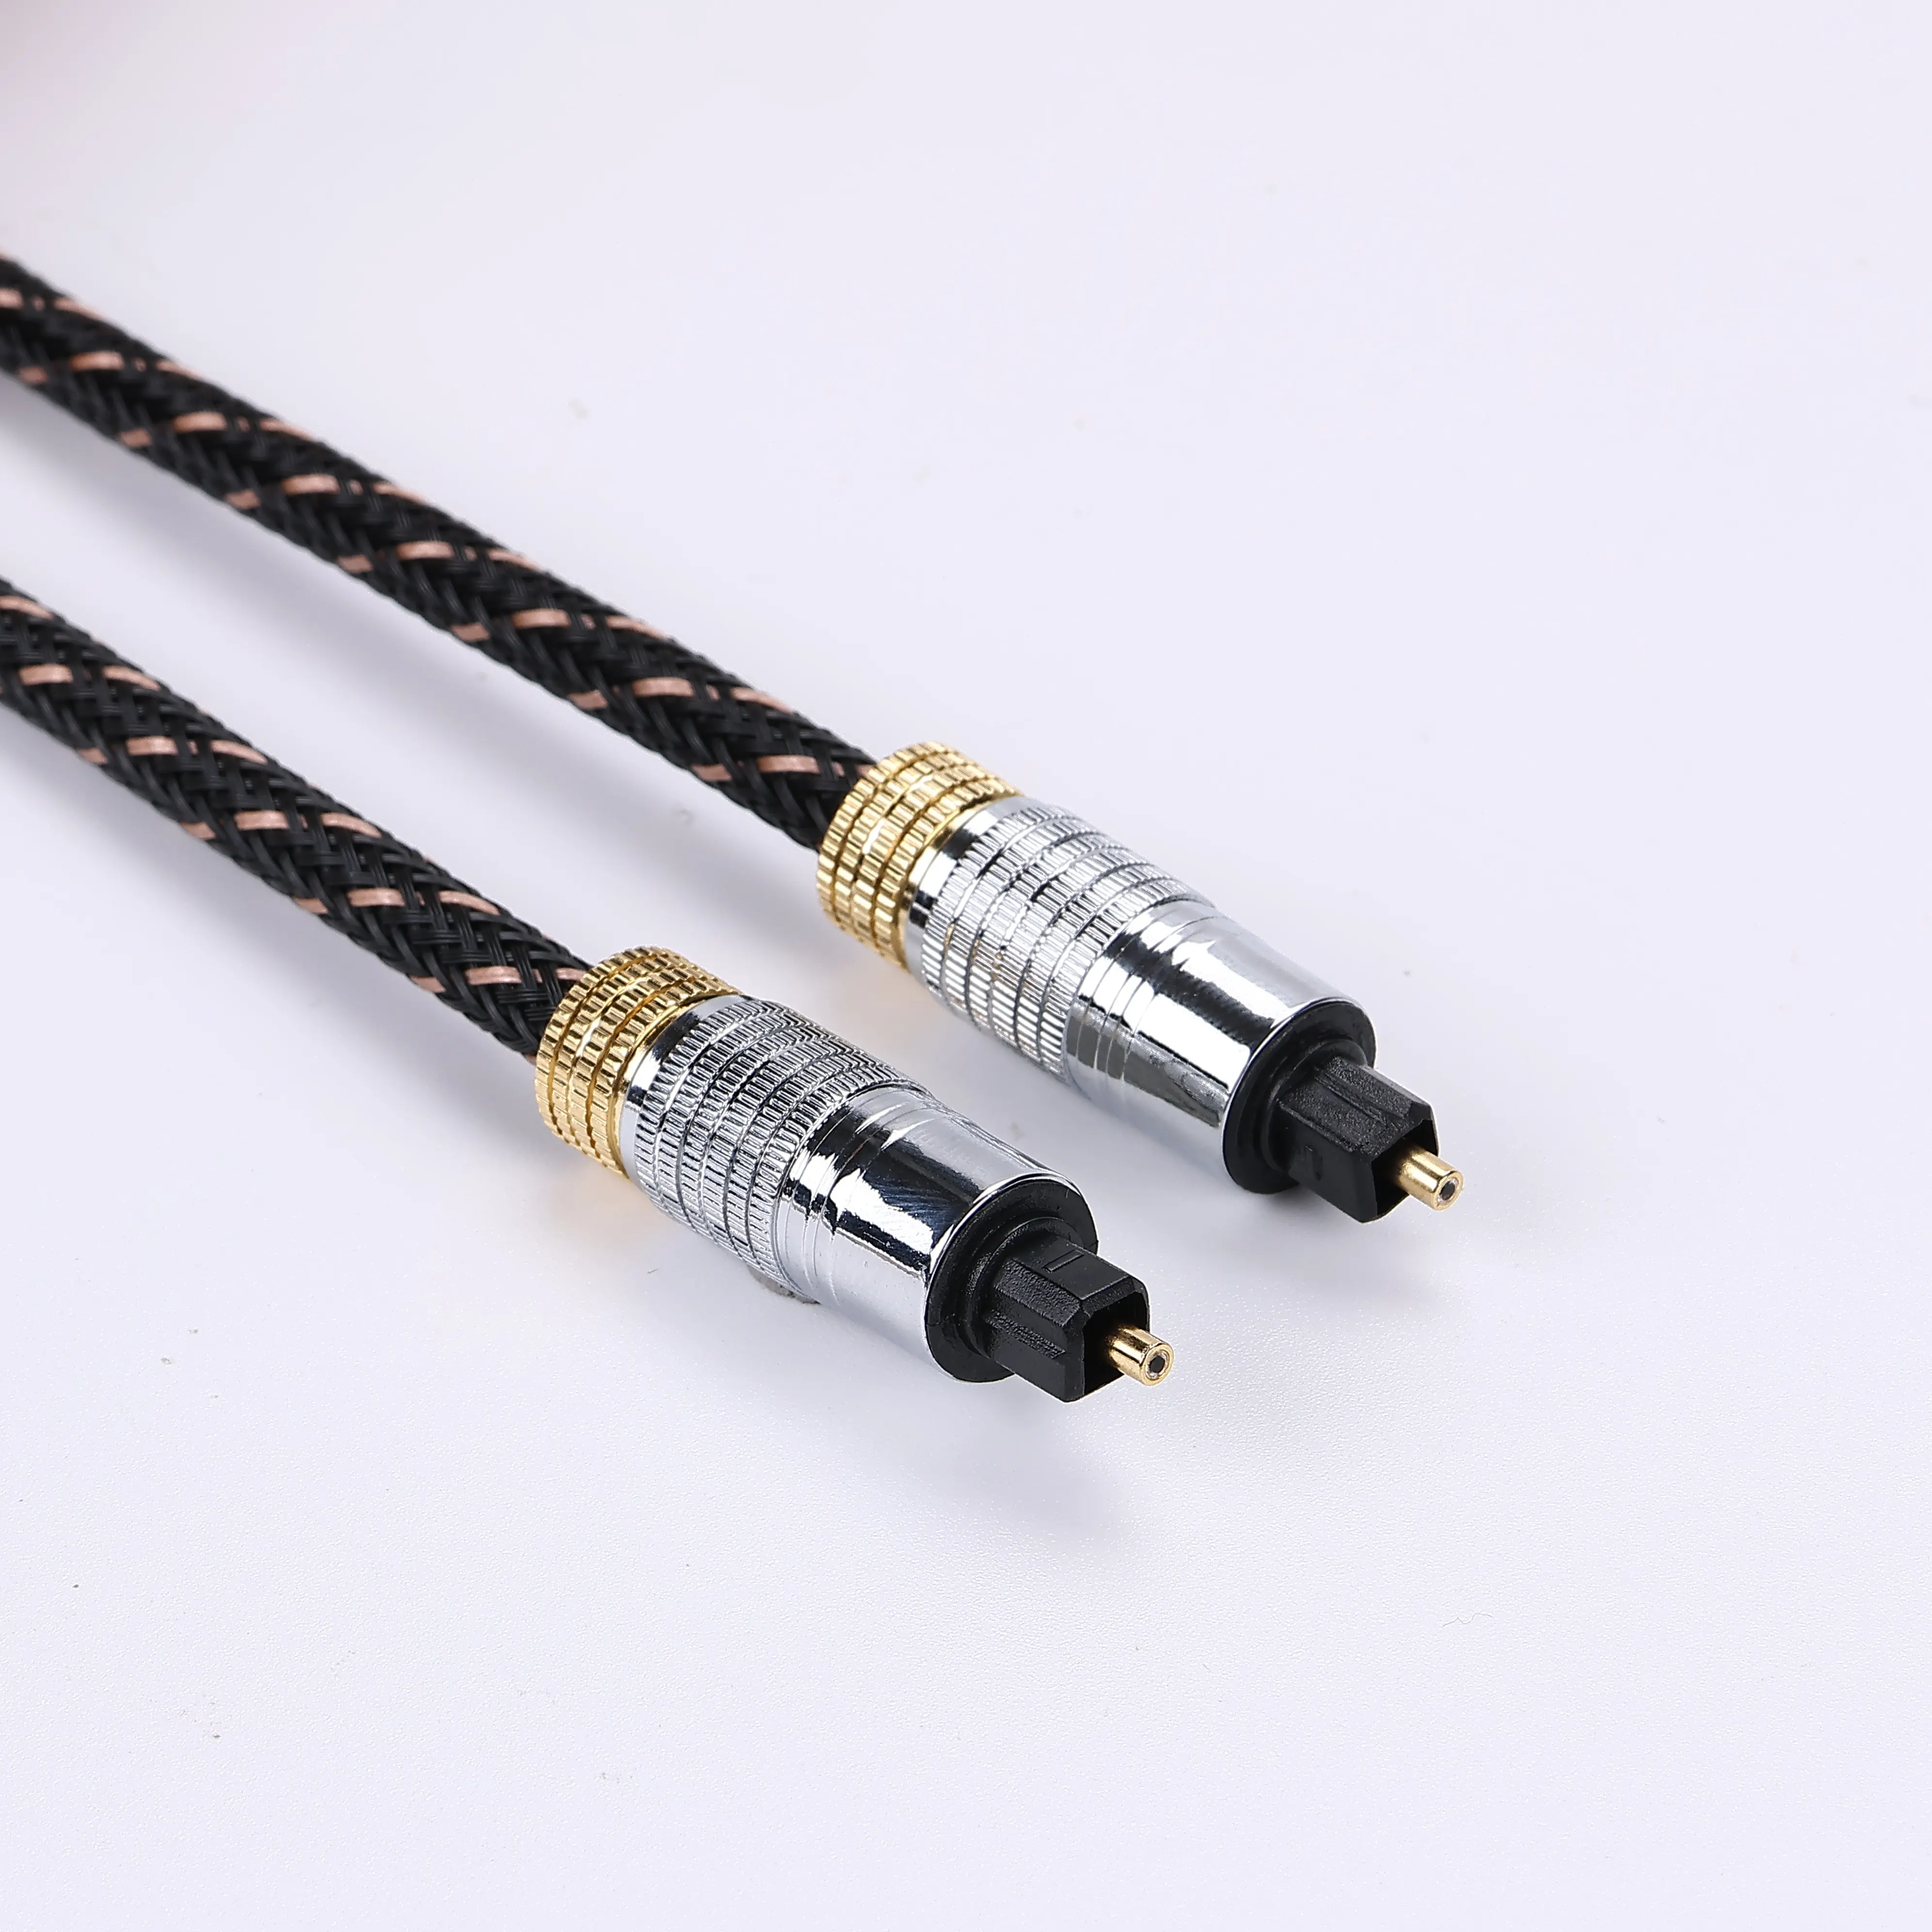 Digital Audio Video Cables Optic Fiber Cable Dolby Surround Technology for Amplifiers Speakers TV Projectors